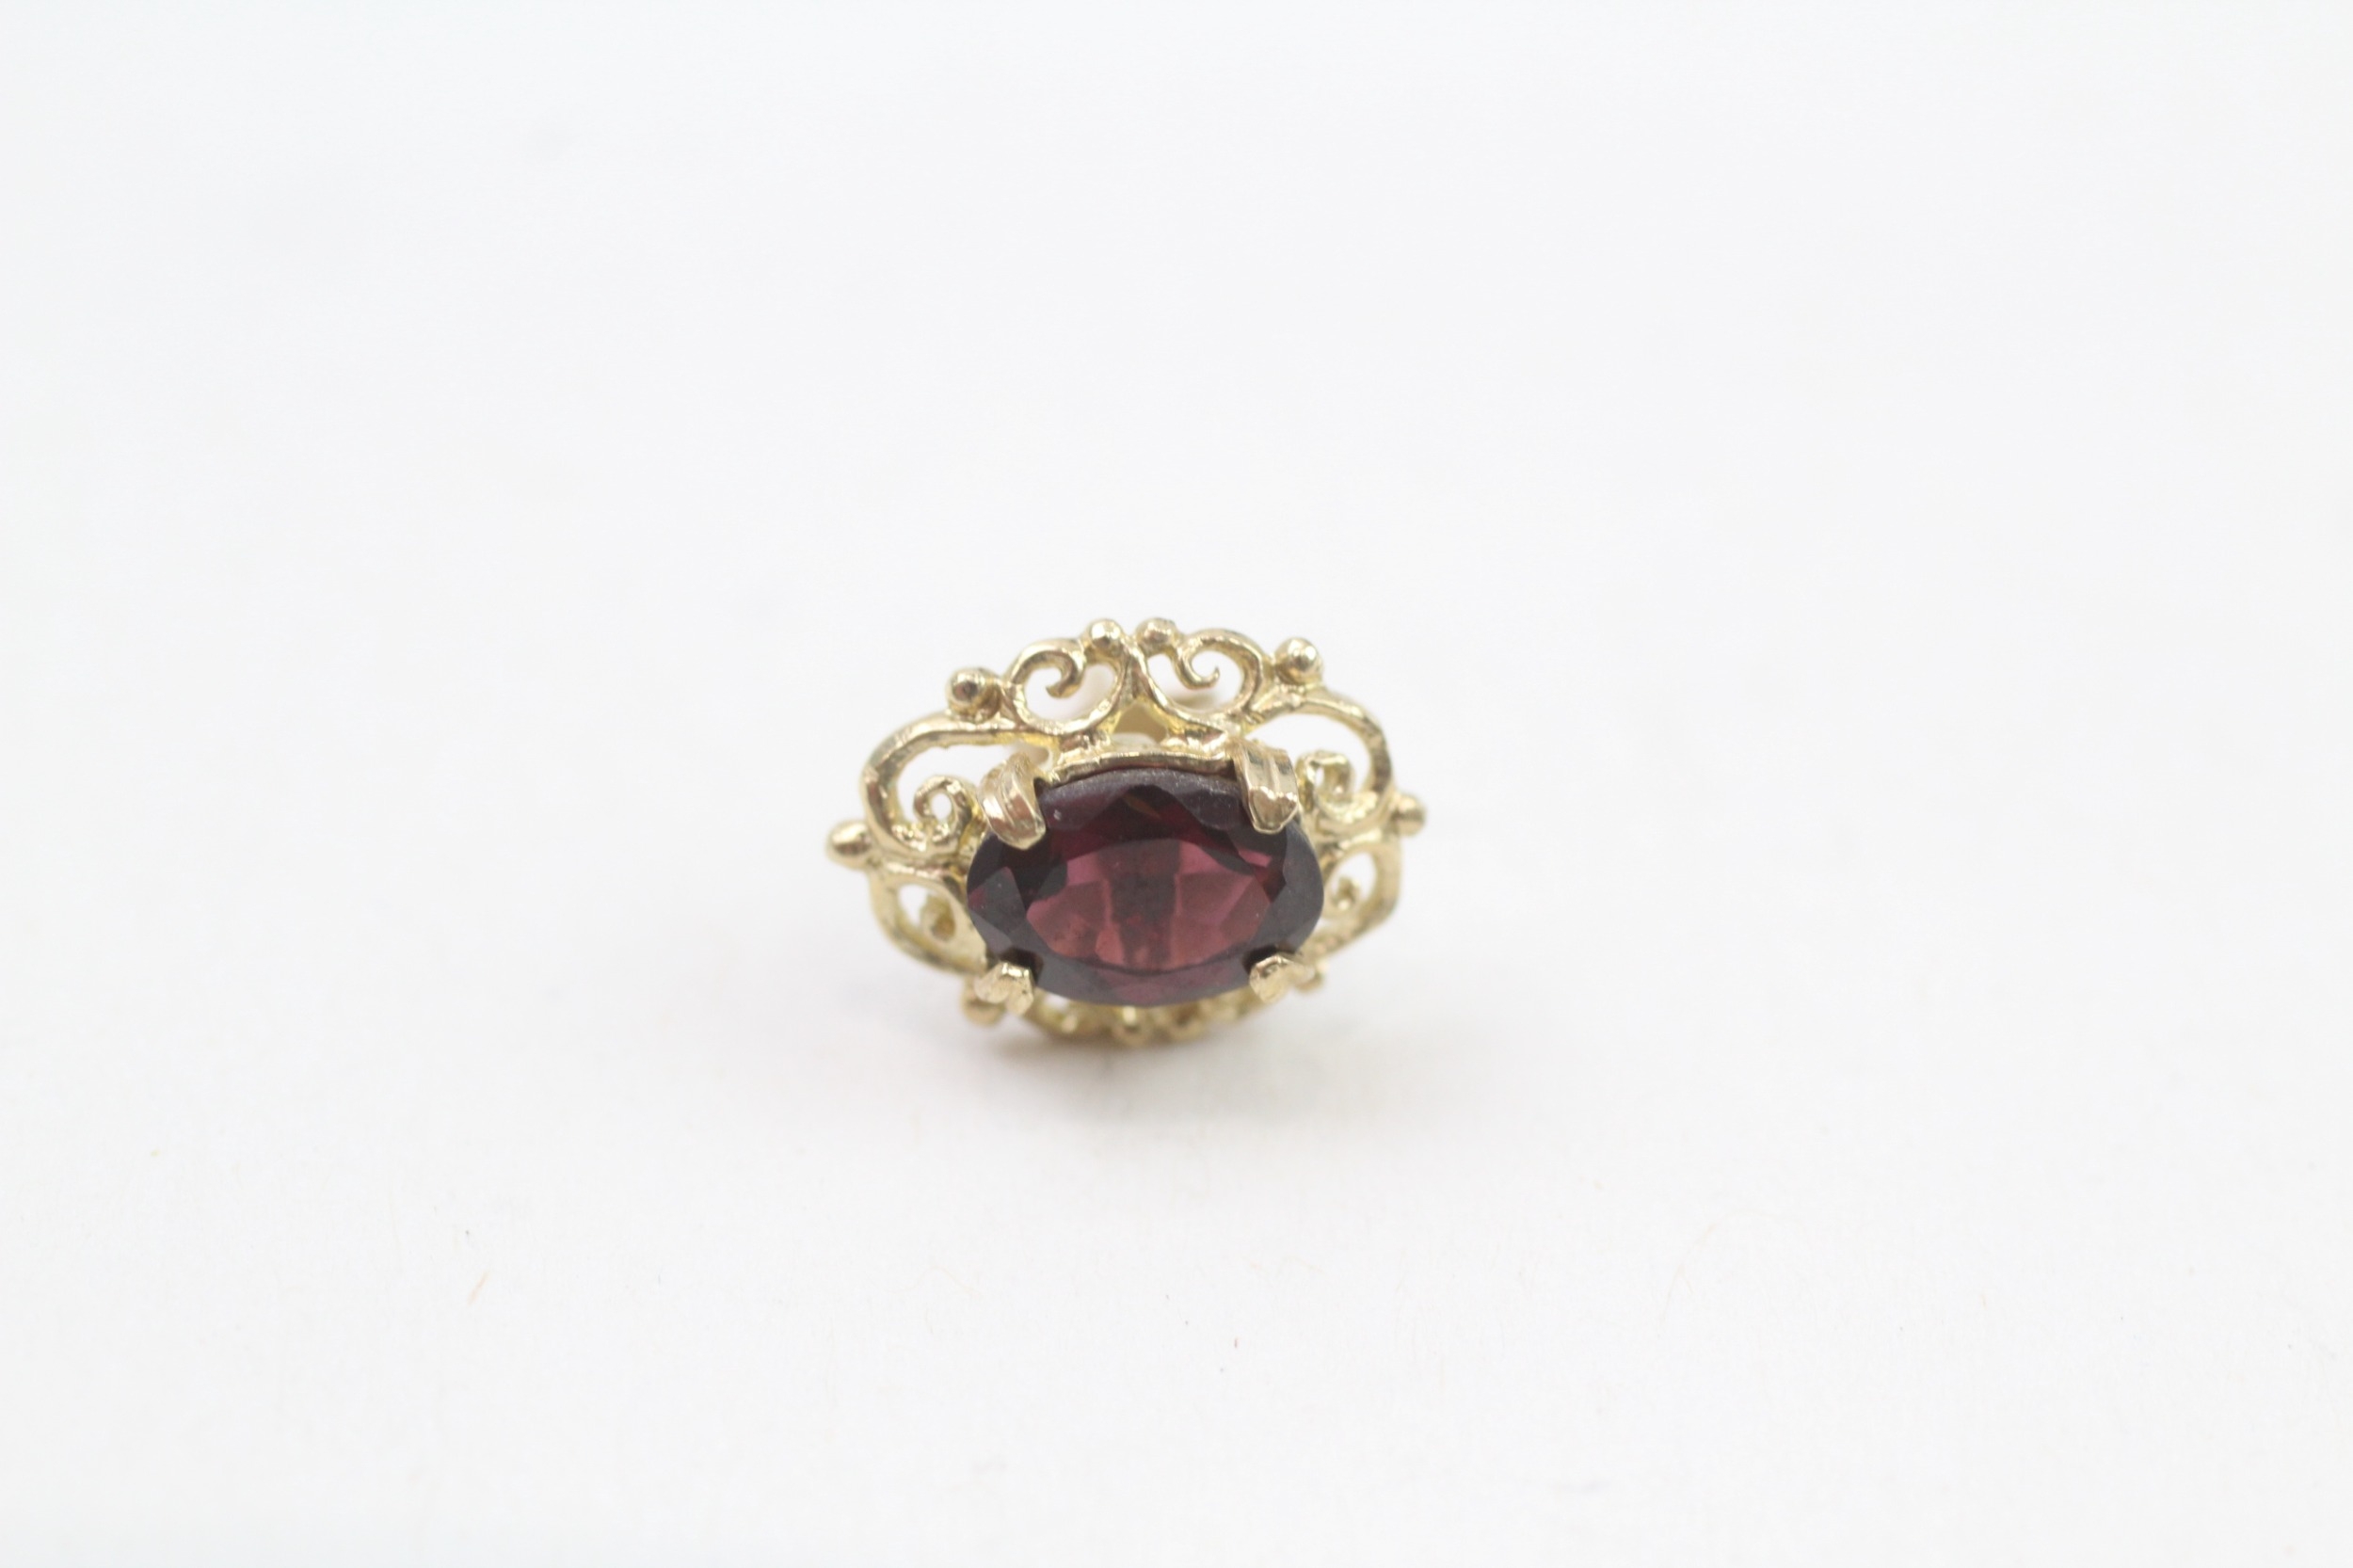 9ct gold oval cut garnet stud earrings with a scroll patterned border (1.7g) - Image 3 of 4